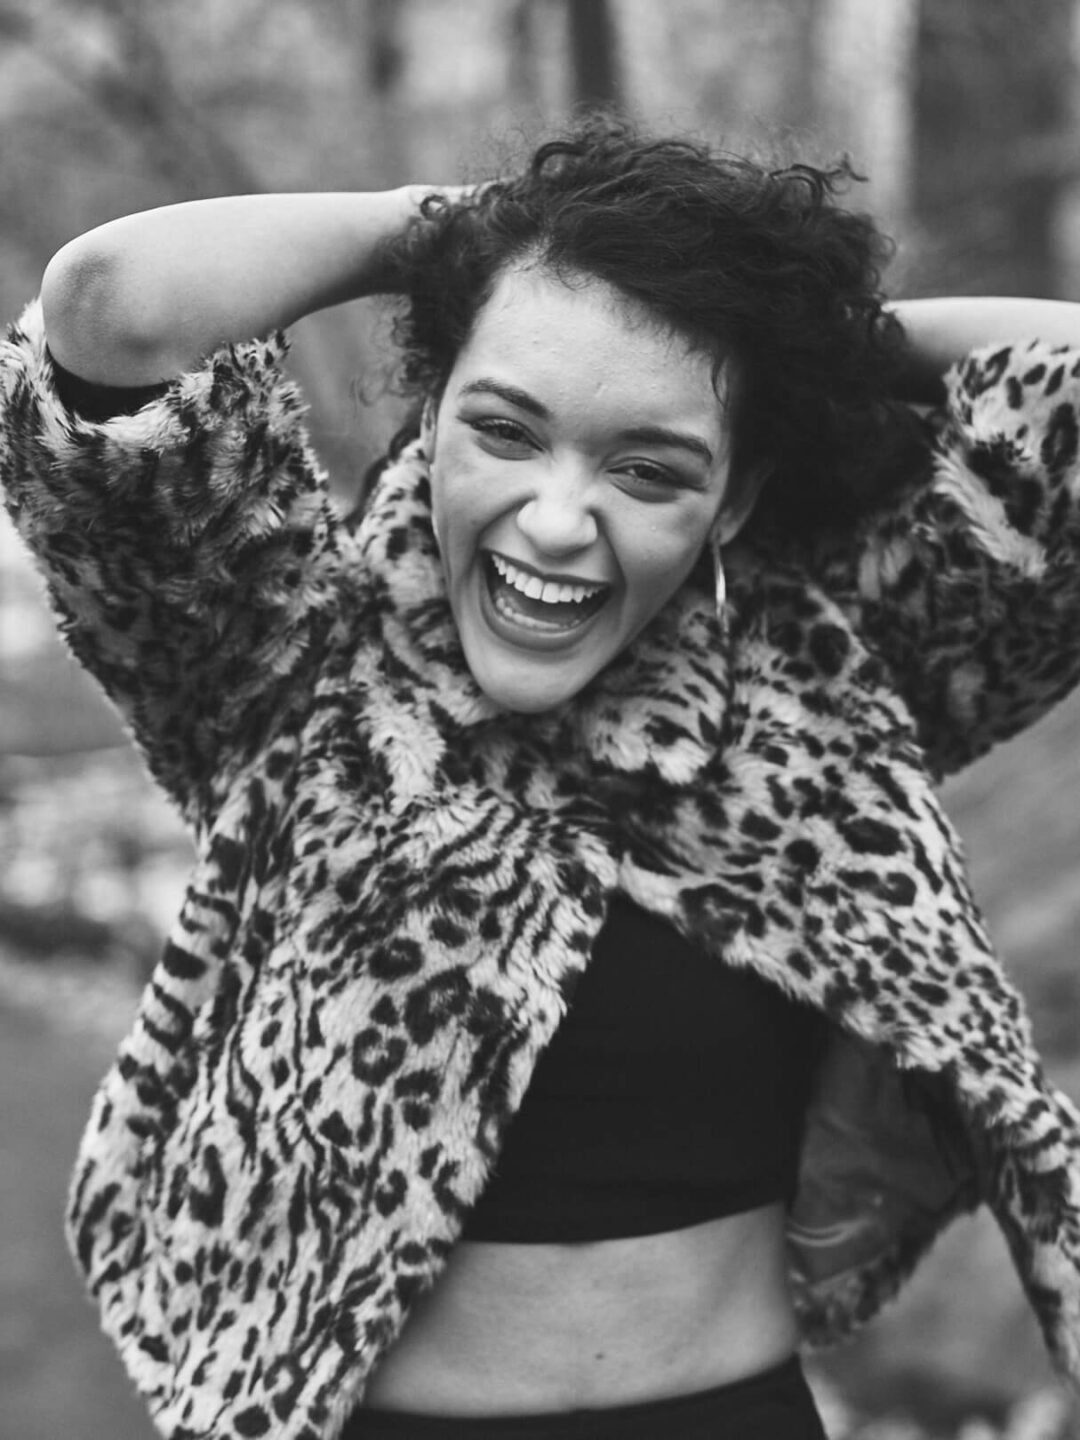 Fuji X Pro2 with xf 56mm f1.2 - Black and White Women's Fashion Photography in Central Park - Woman with leopard print jacket - Model: Jess